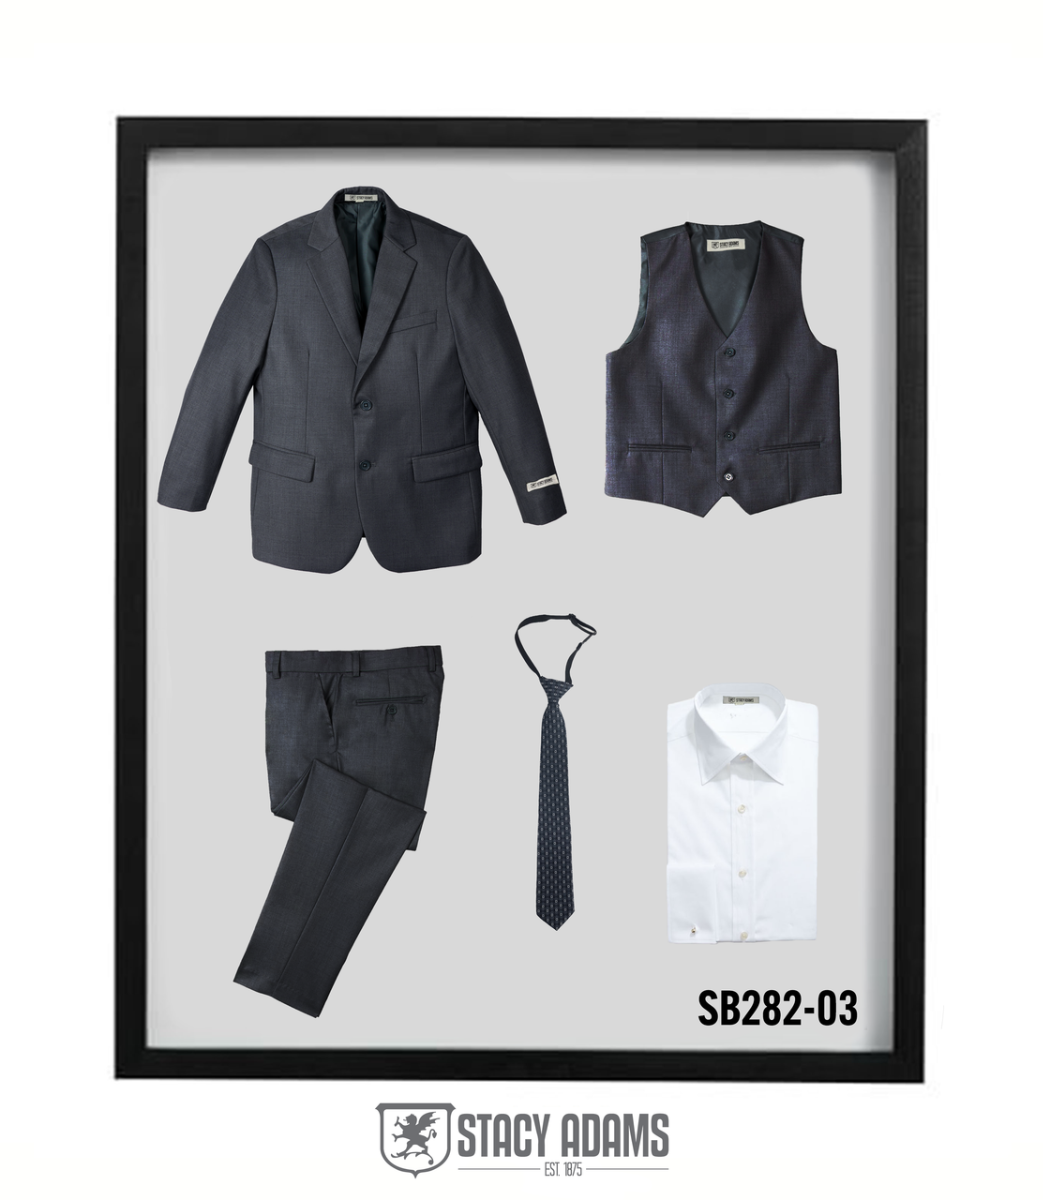 Stacy Adams Boys' 5-Piece Solid-Colored Suit & Varied Tie Set